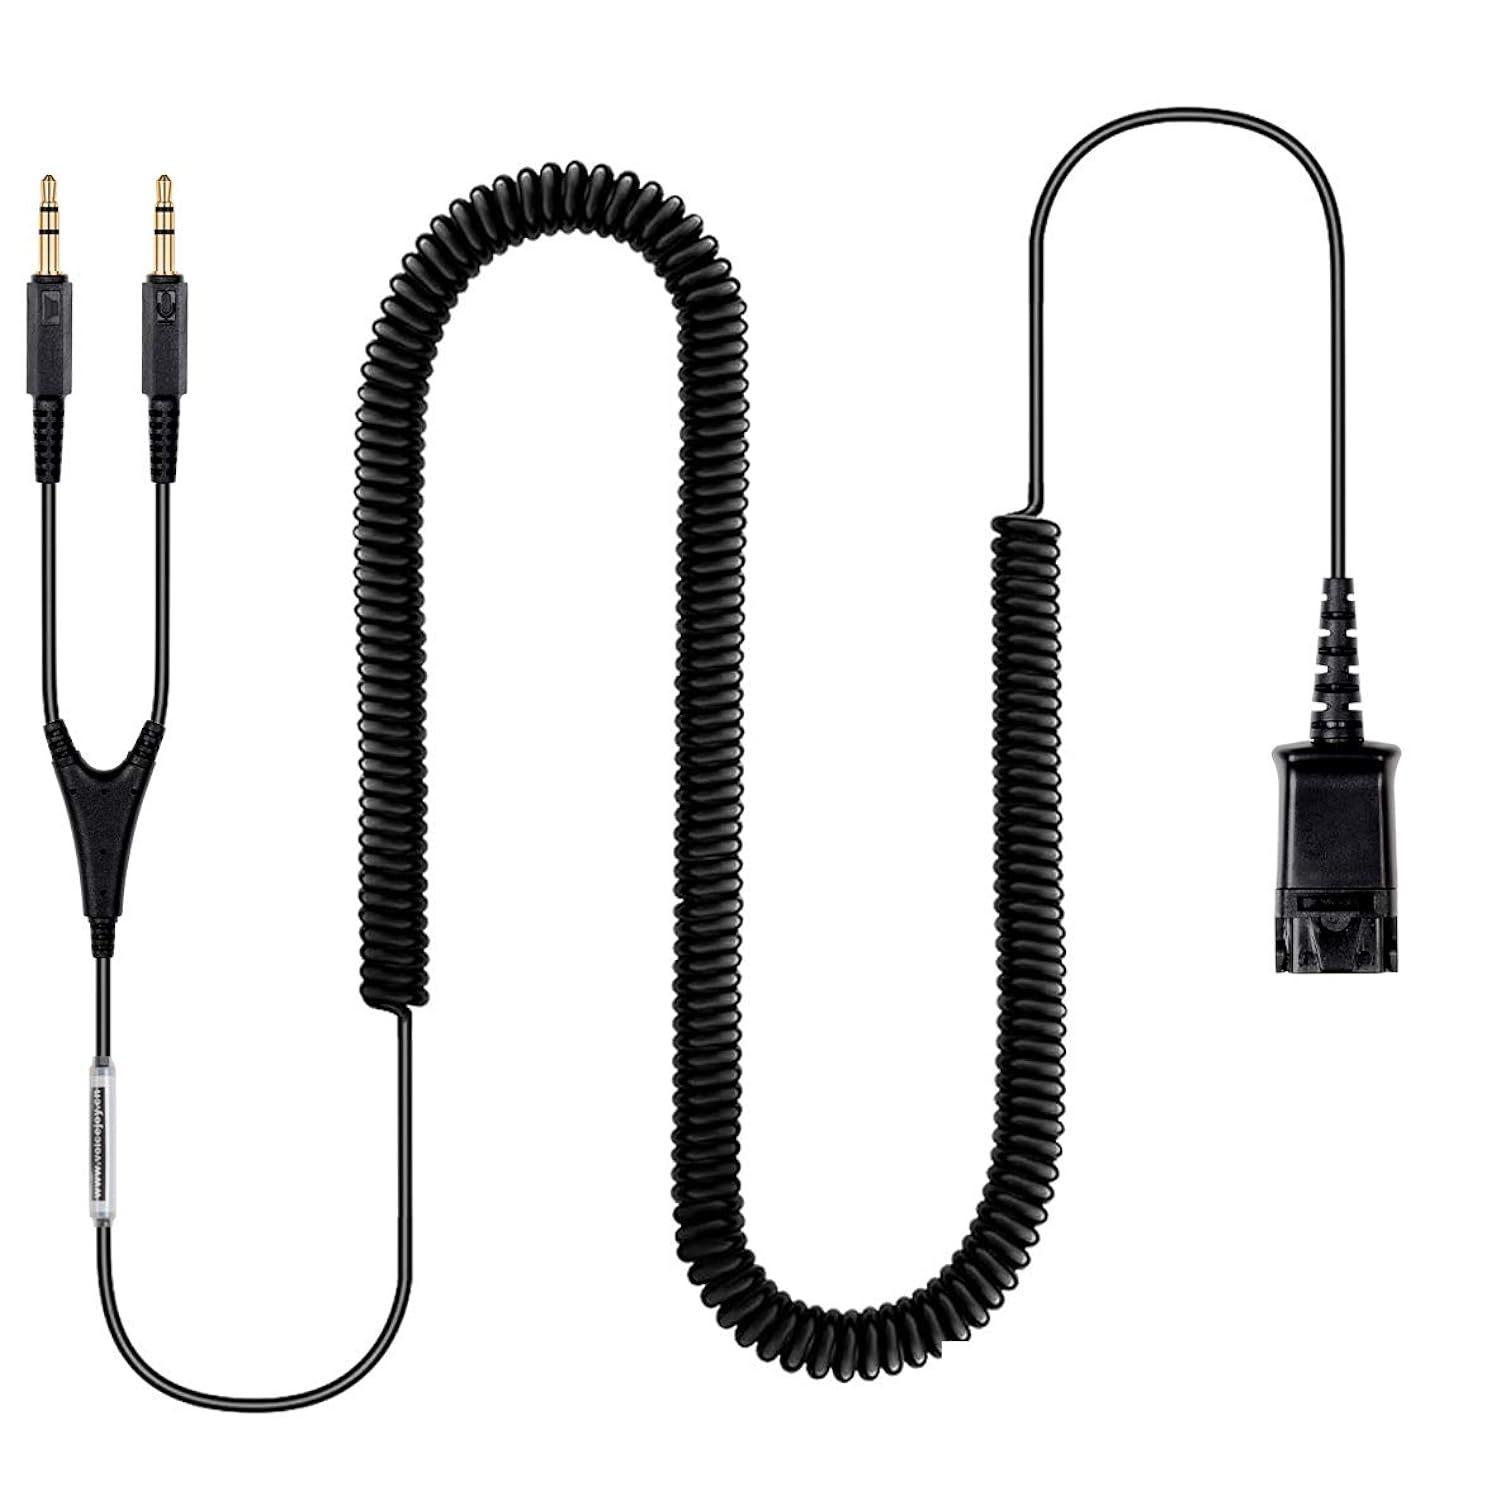 Gold-Plated Headset Qd To 3.5Mm Quick Disconnect Cable For Plantronics Headsets, - $25.99